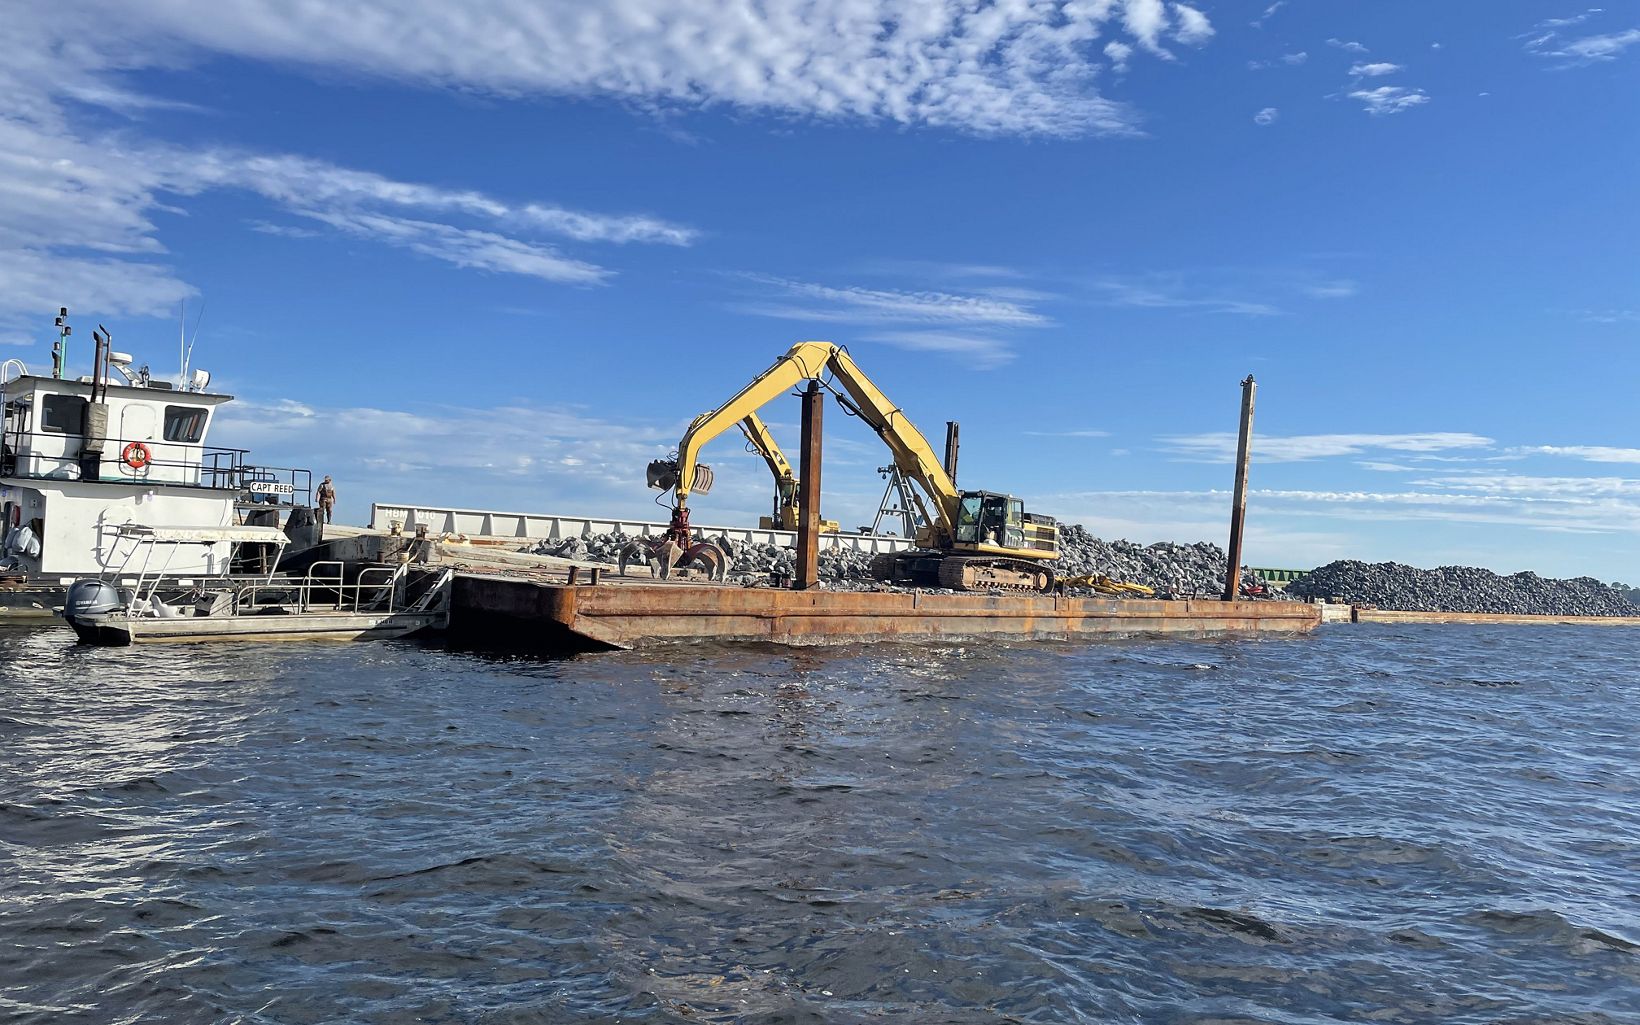 Transferring the Limestone Transferring the limestone rock from a large barge to a smaller barge that is able to access the shallow water.  © Jacobs Engineering